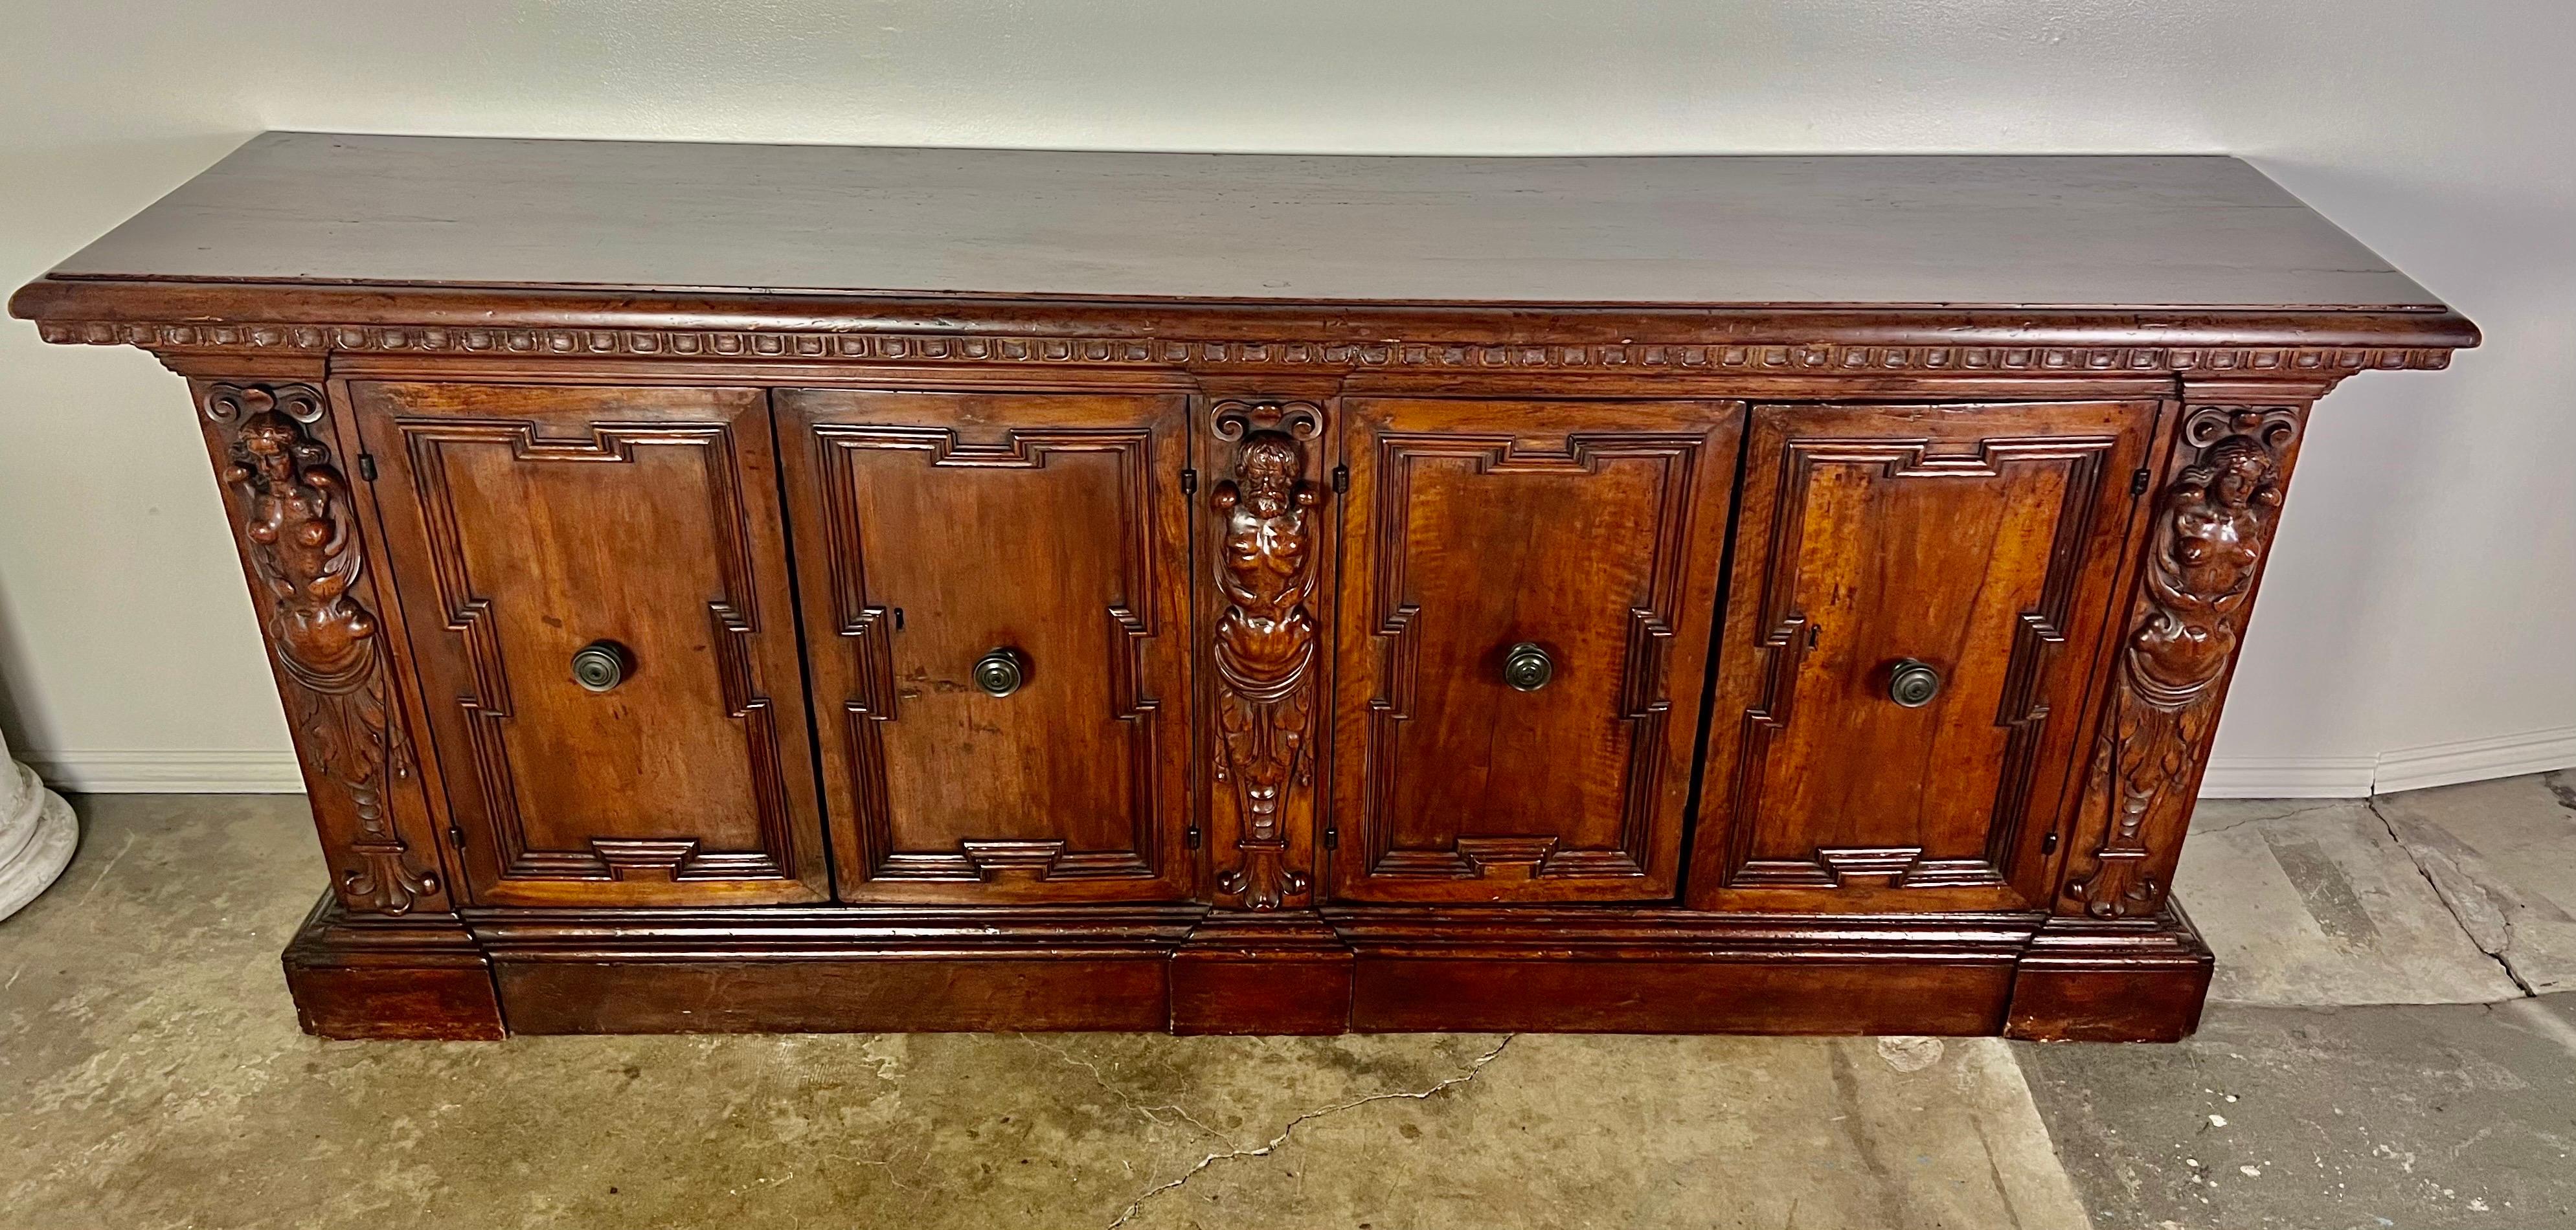 Renaissance 19th Century Walnut Italian Credenza with Intricate Carving Throughout For Sale